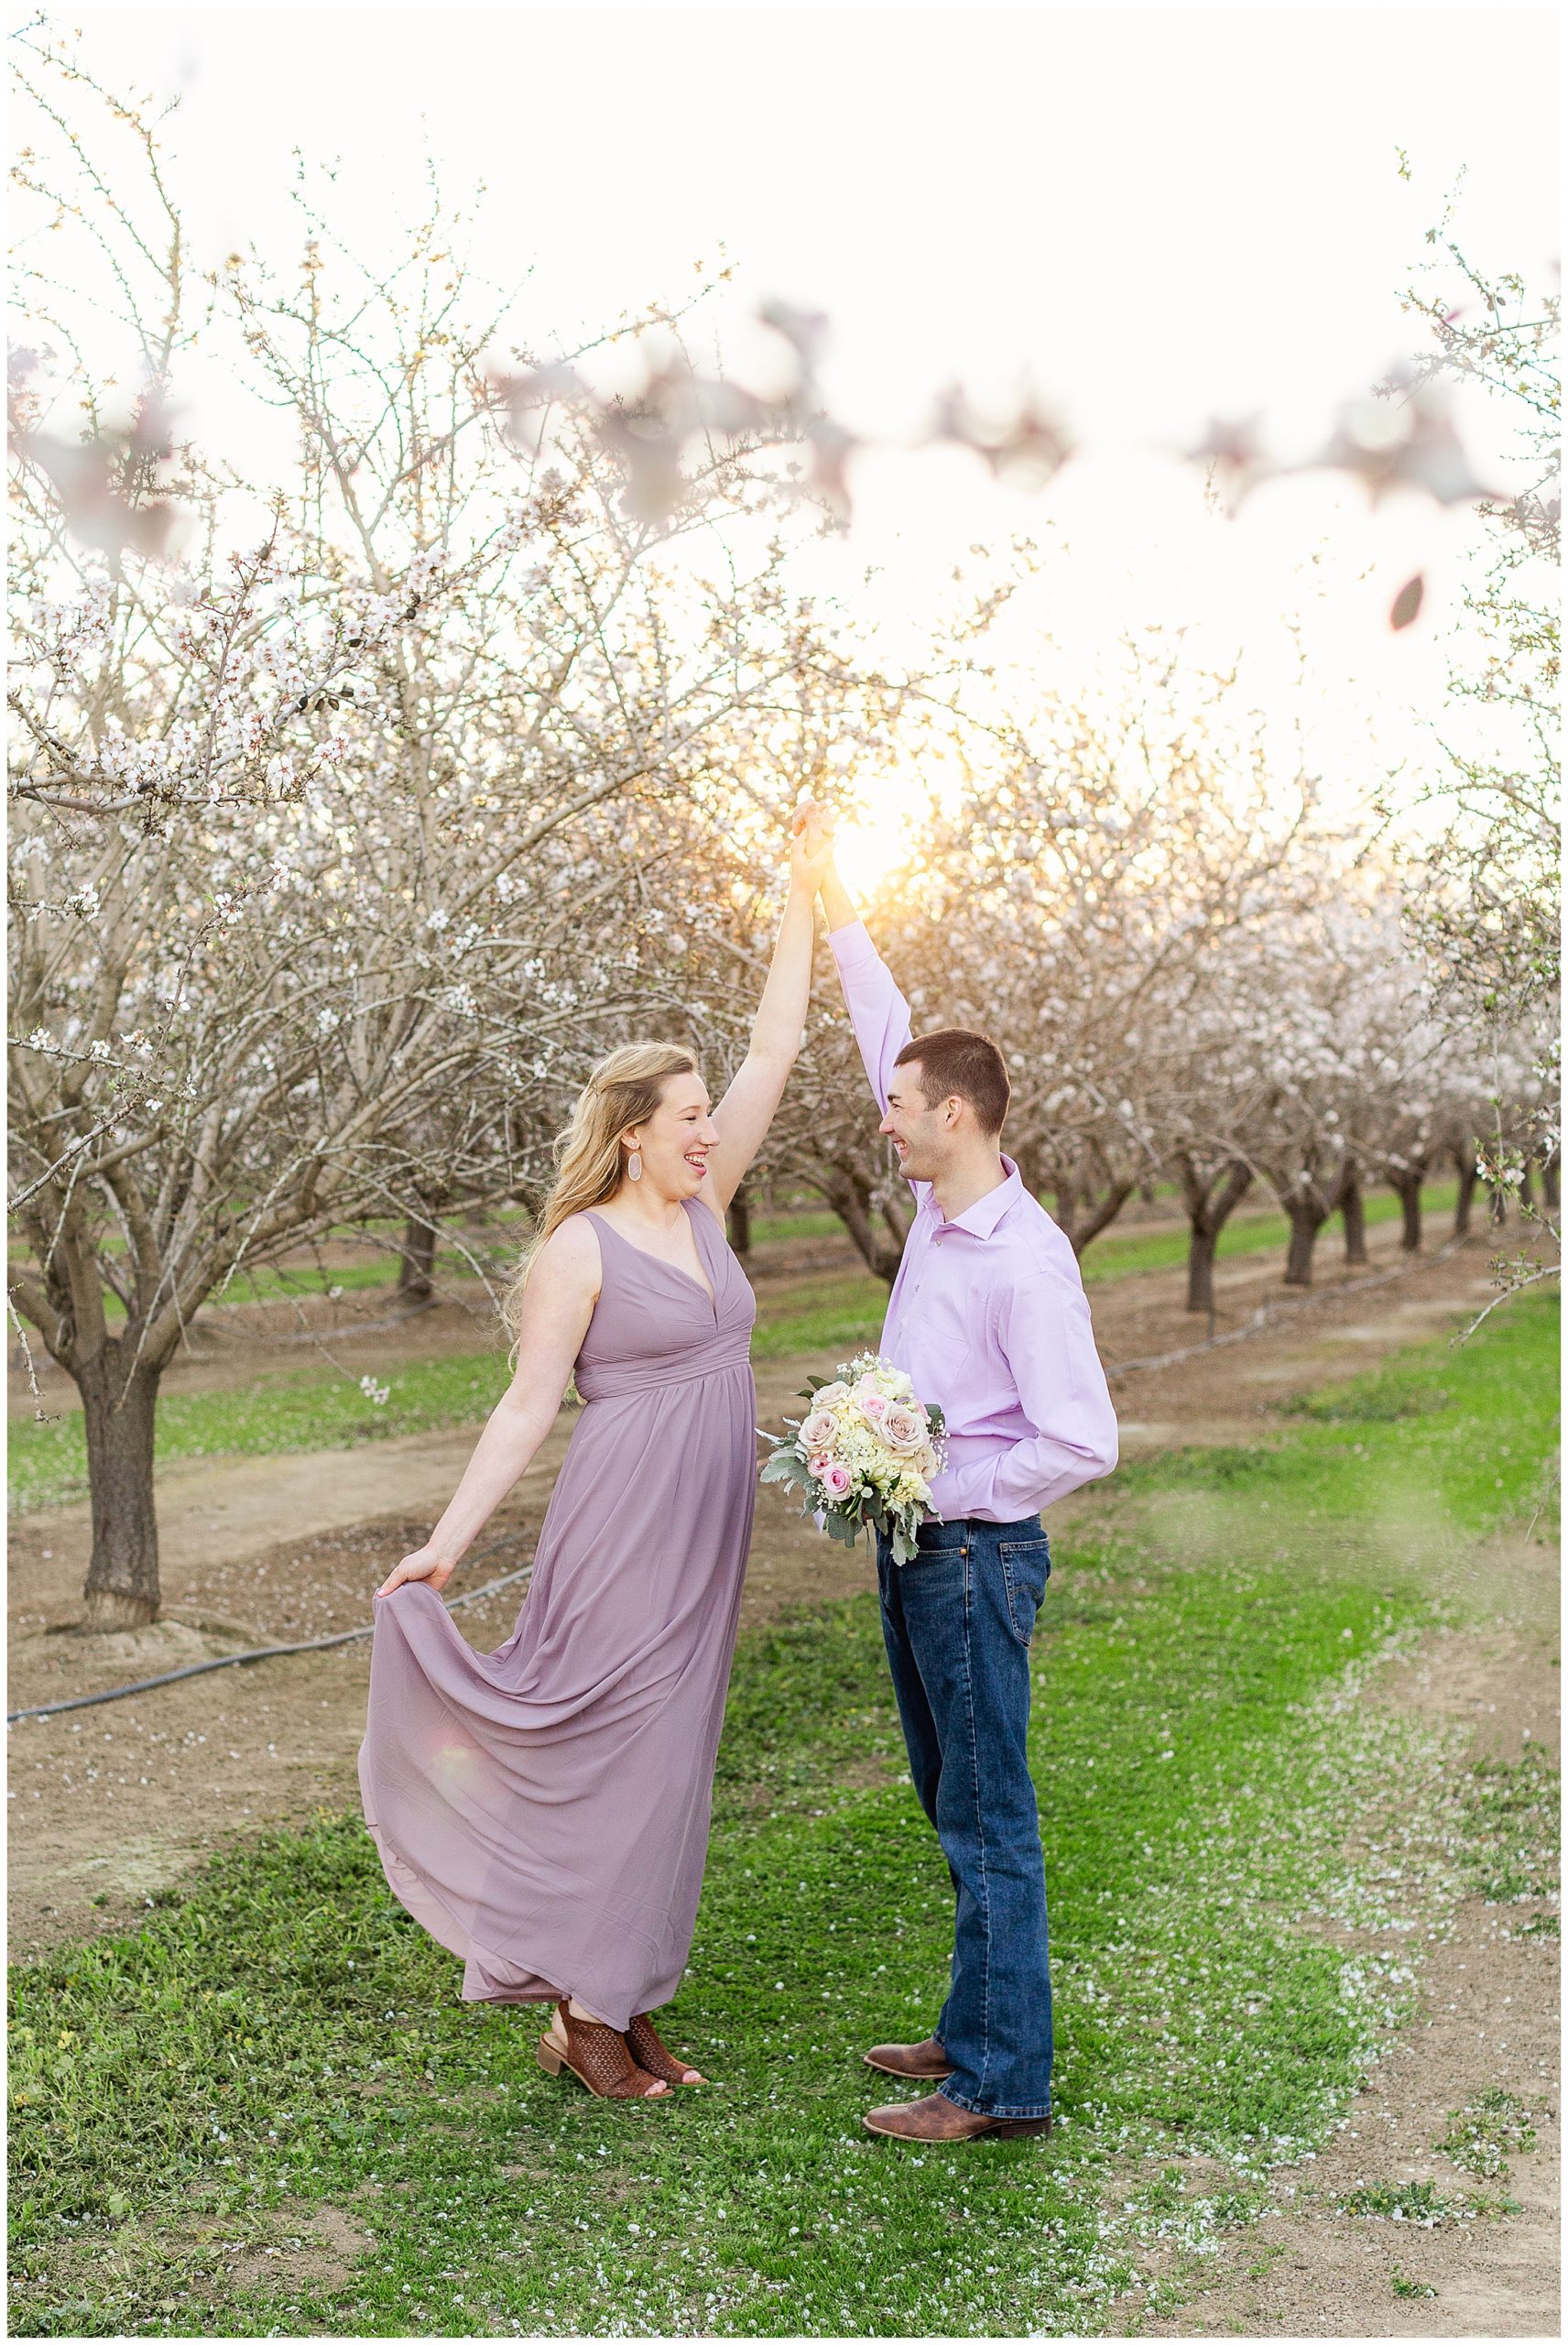 Twirling in the almond blossoms | Andrea + Jason